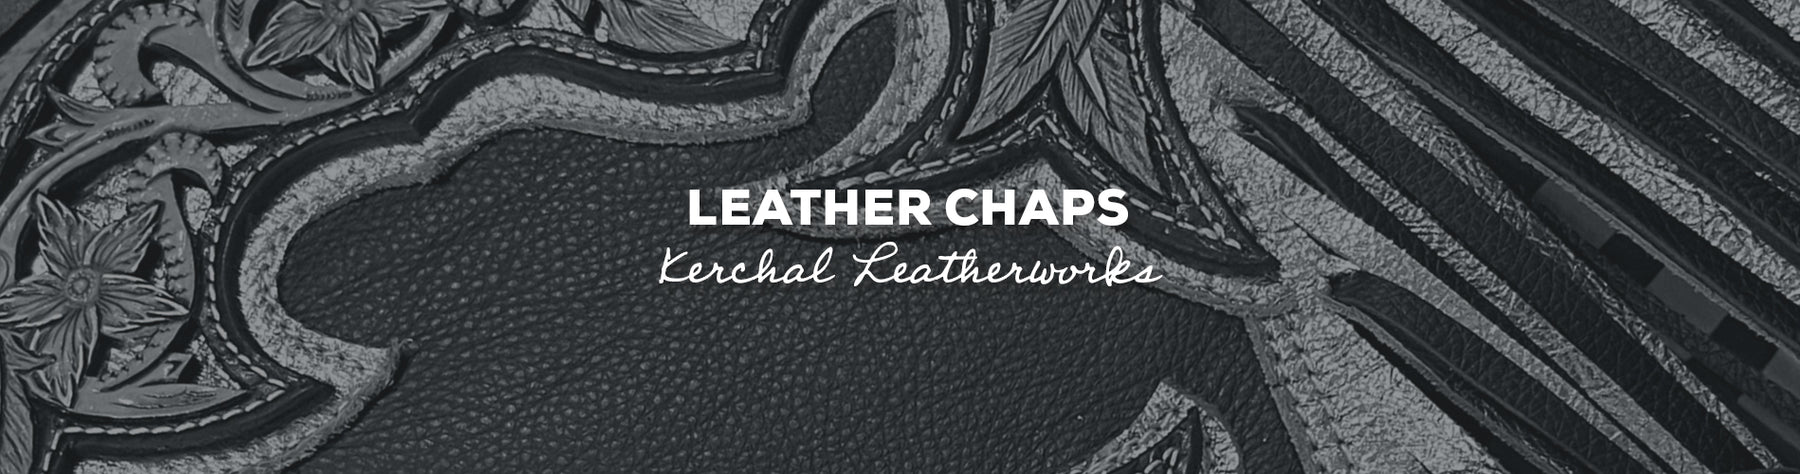 Gift Idea: Leather Chaps with Kerchal Leatherworks